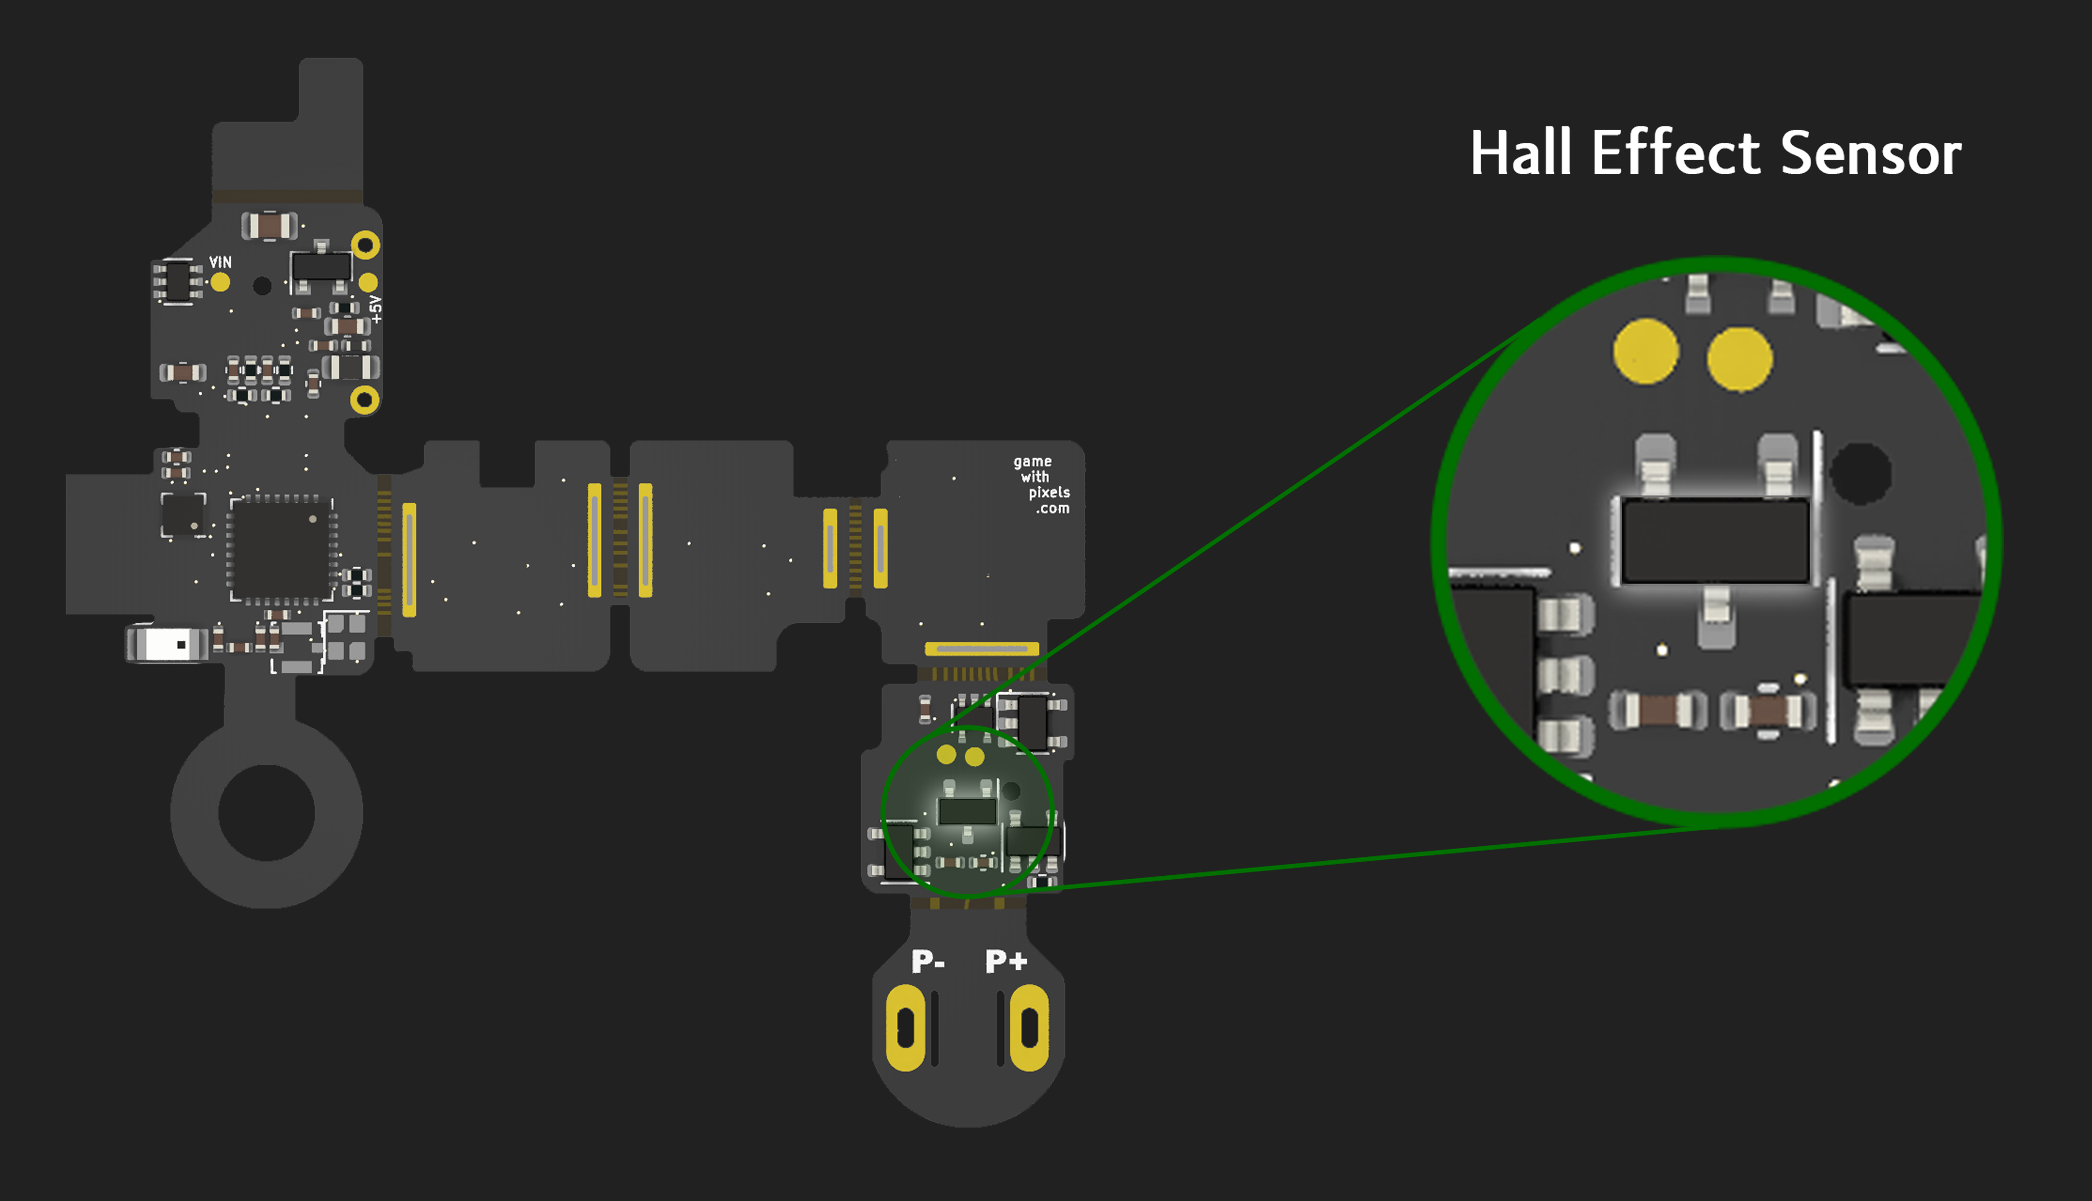 Render of unfolded circuit board for D6 highlighting the Hall Effect Sensor component.